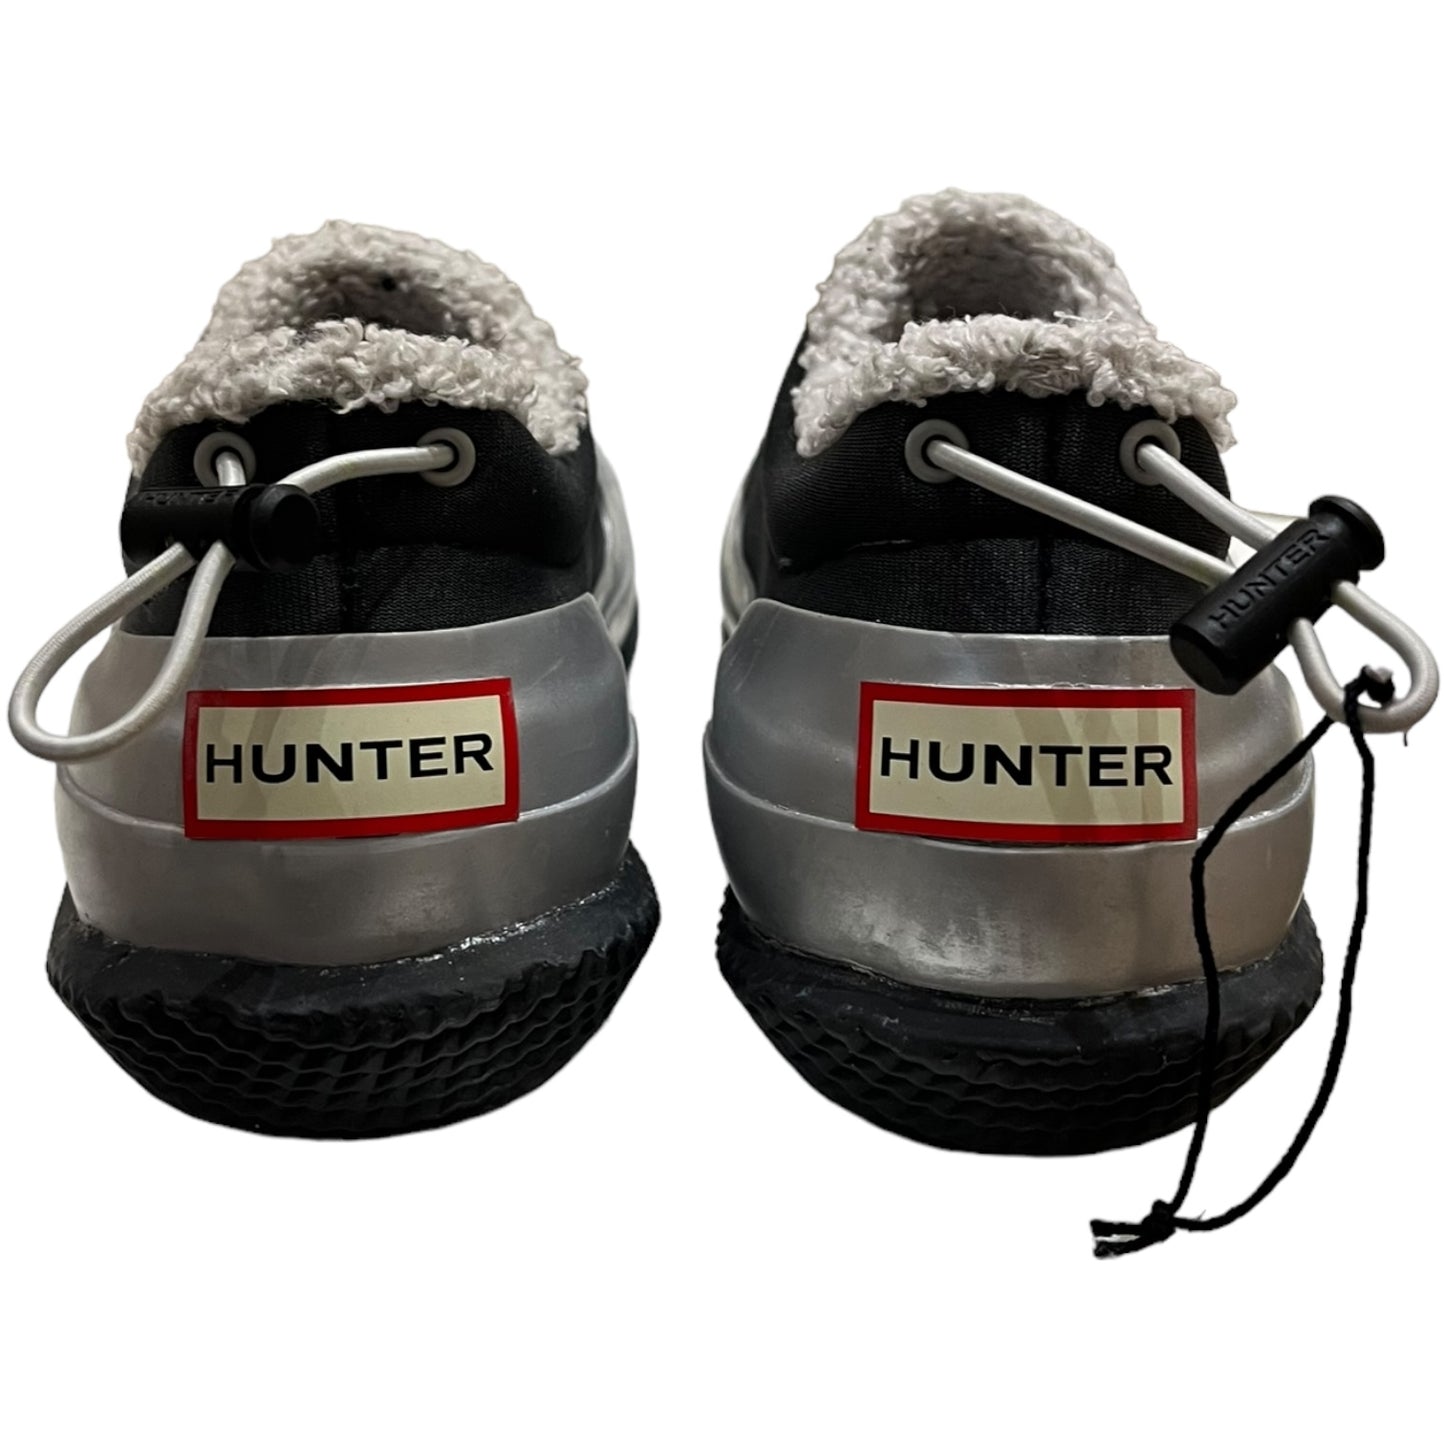 NEW Hunter Silver Wellie Boots